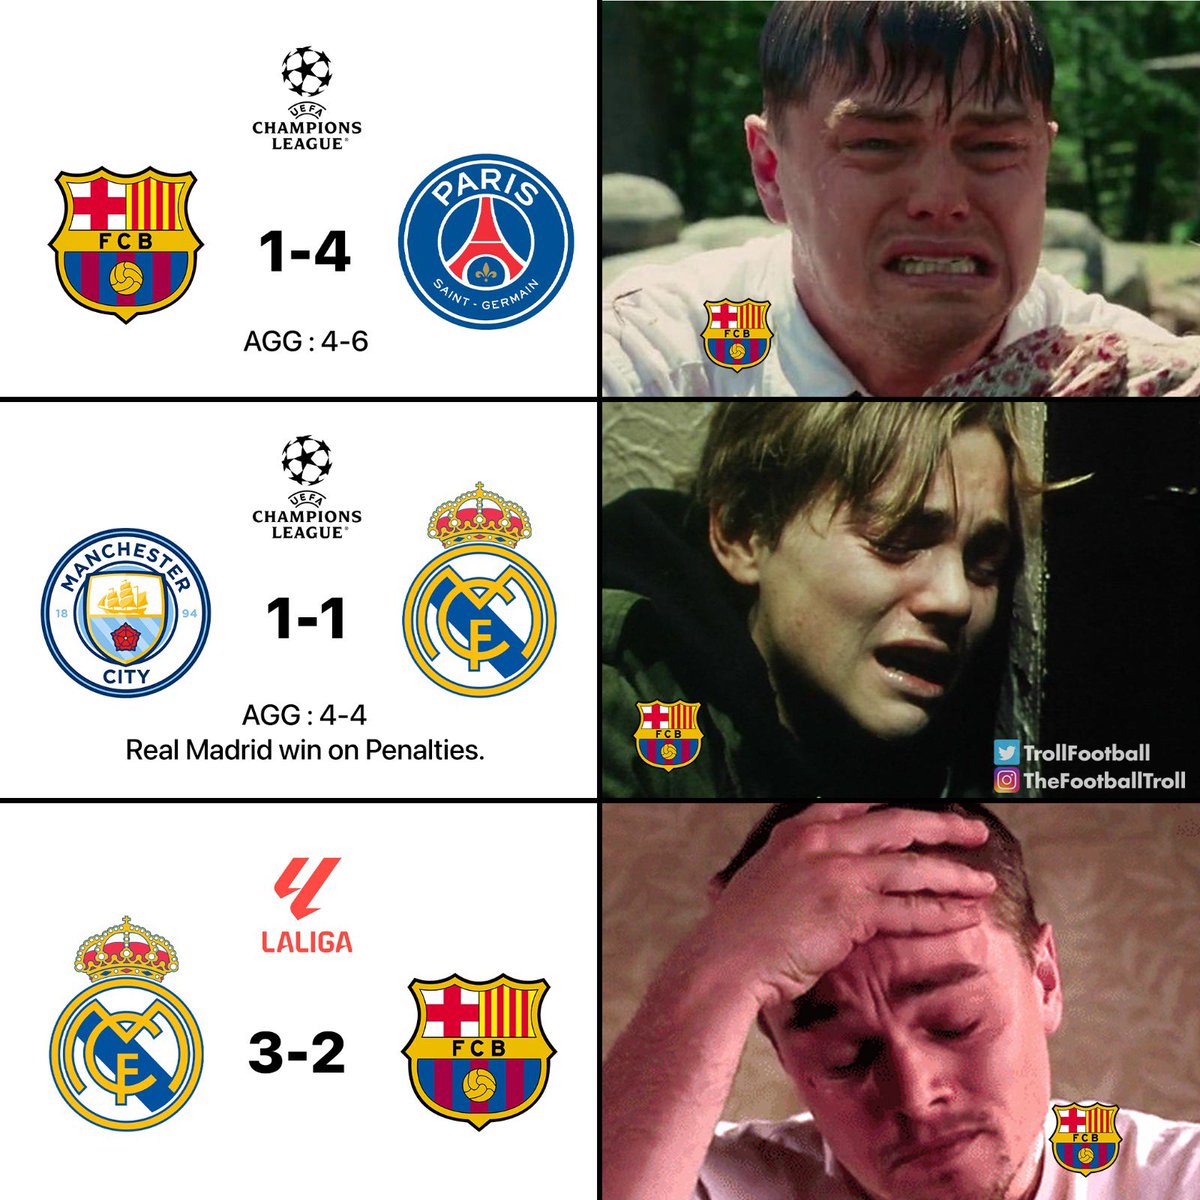 Barca fans in last 5 days